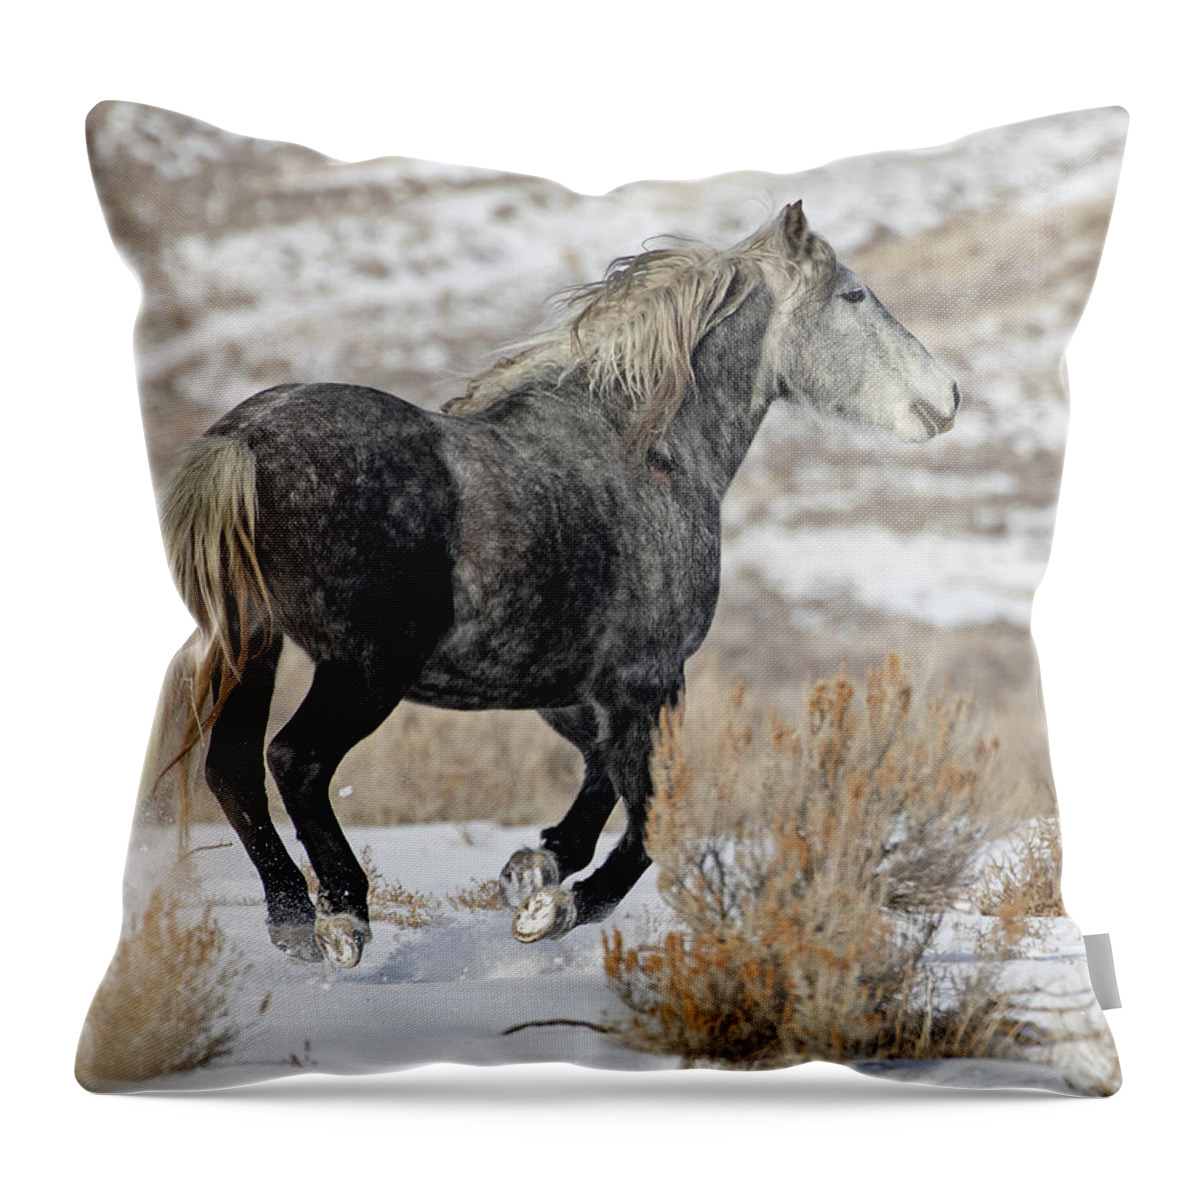 Wild Mustangs Throw Pillow featuring the photograph Rigel on the Run by Mindy Musick King